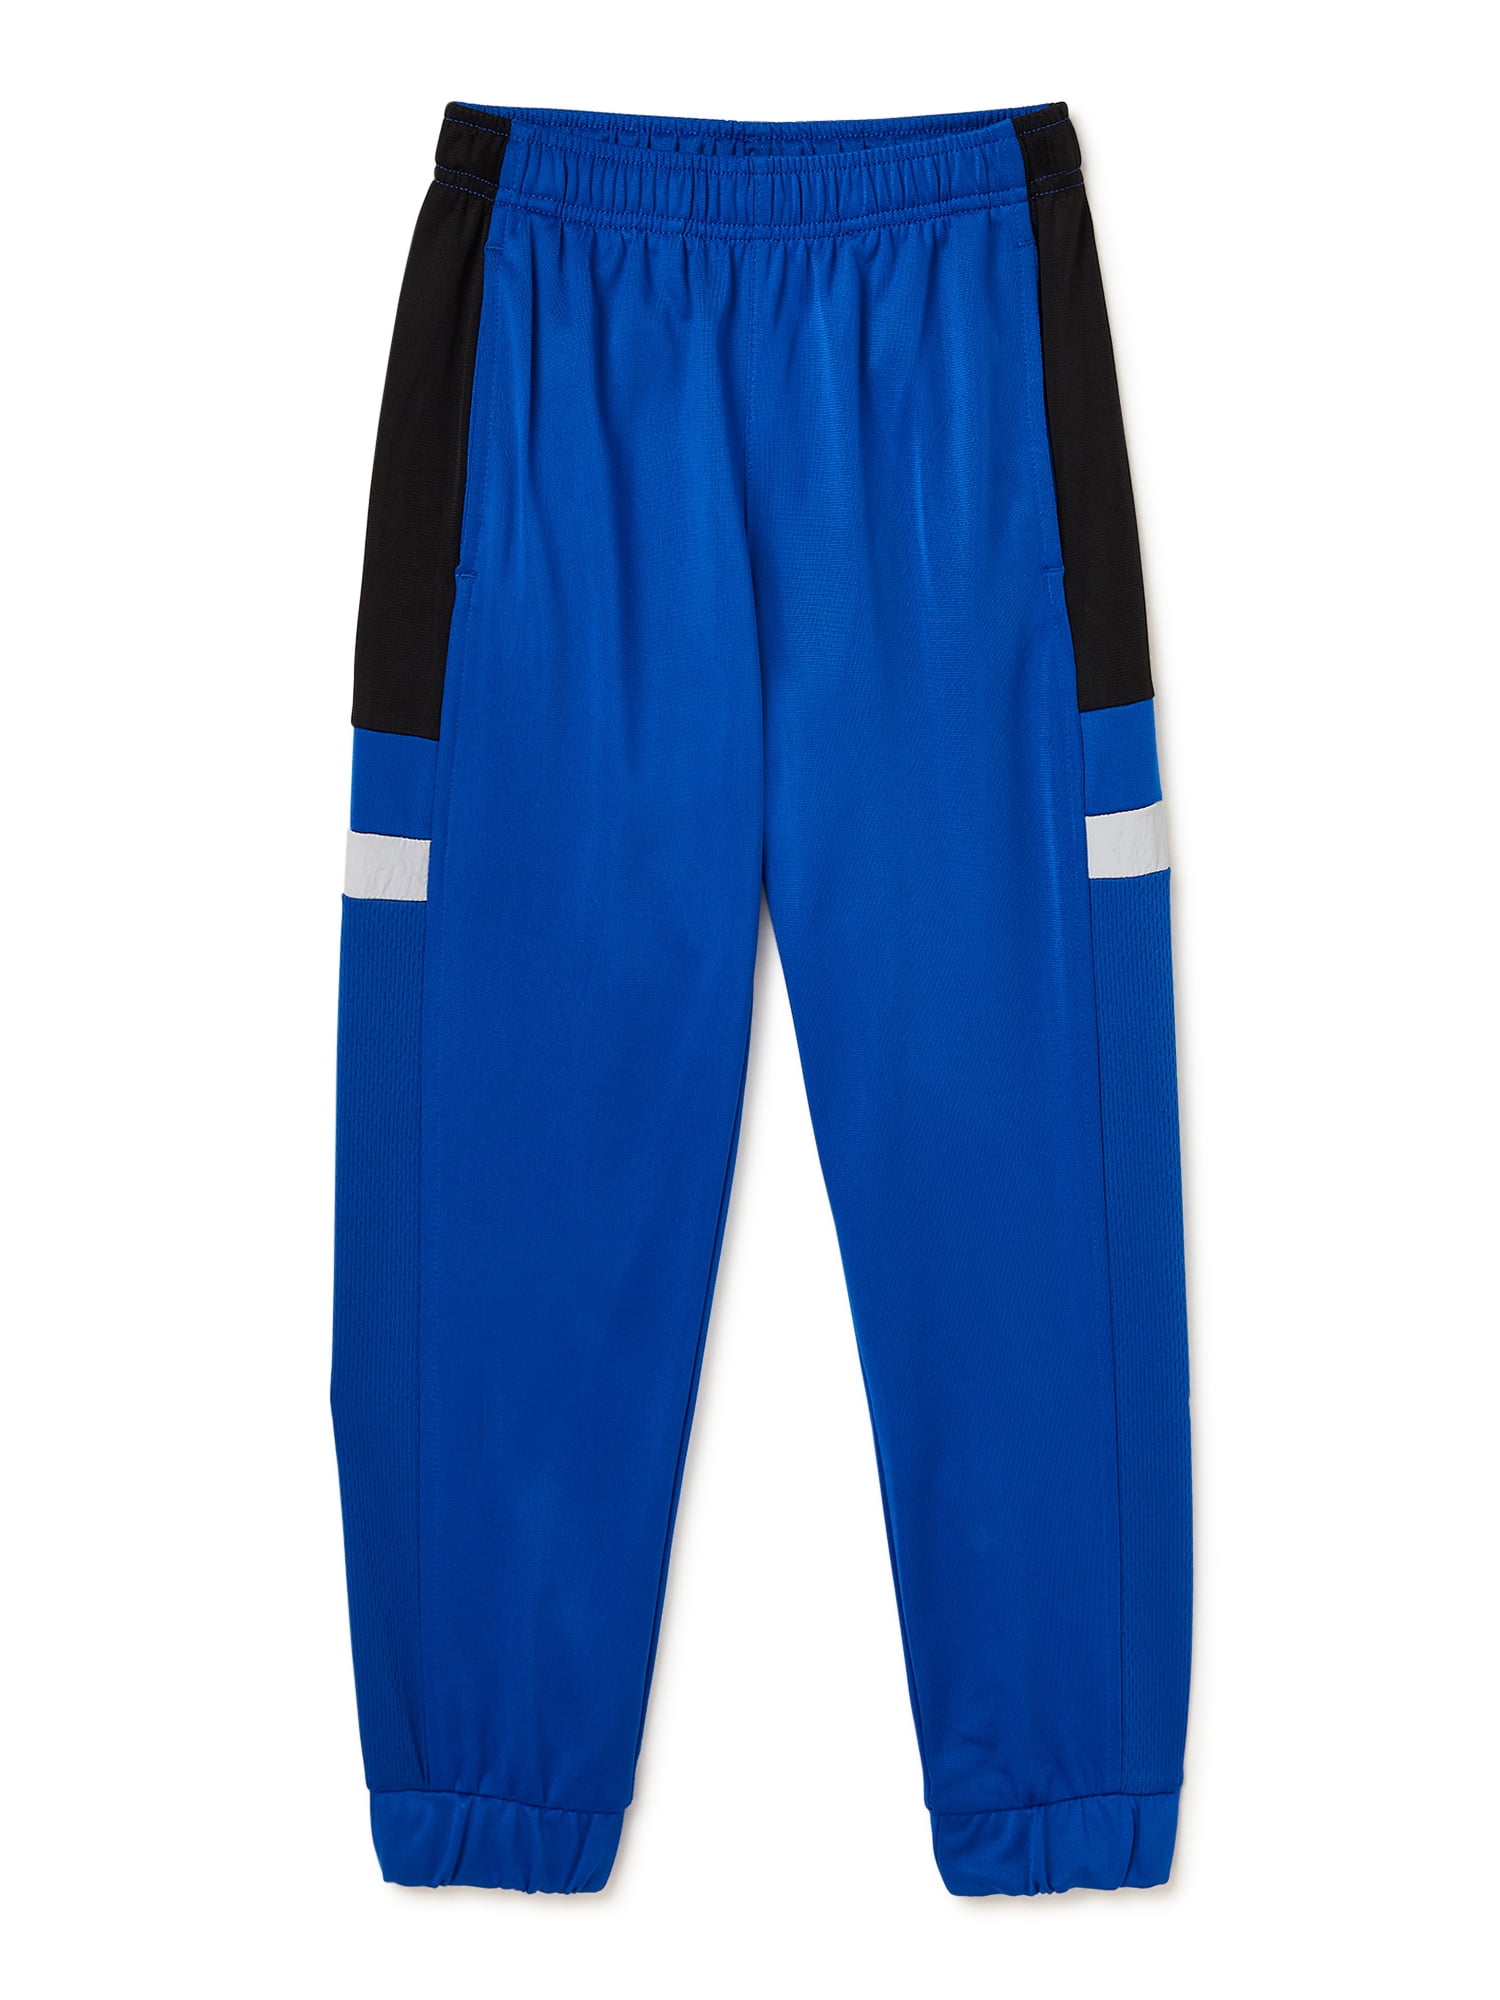 Athletic Works Boys Tricot Track Pants, Sizes 4-18 & Husky